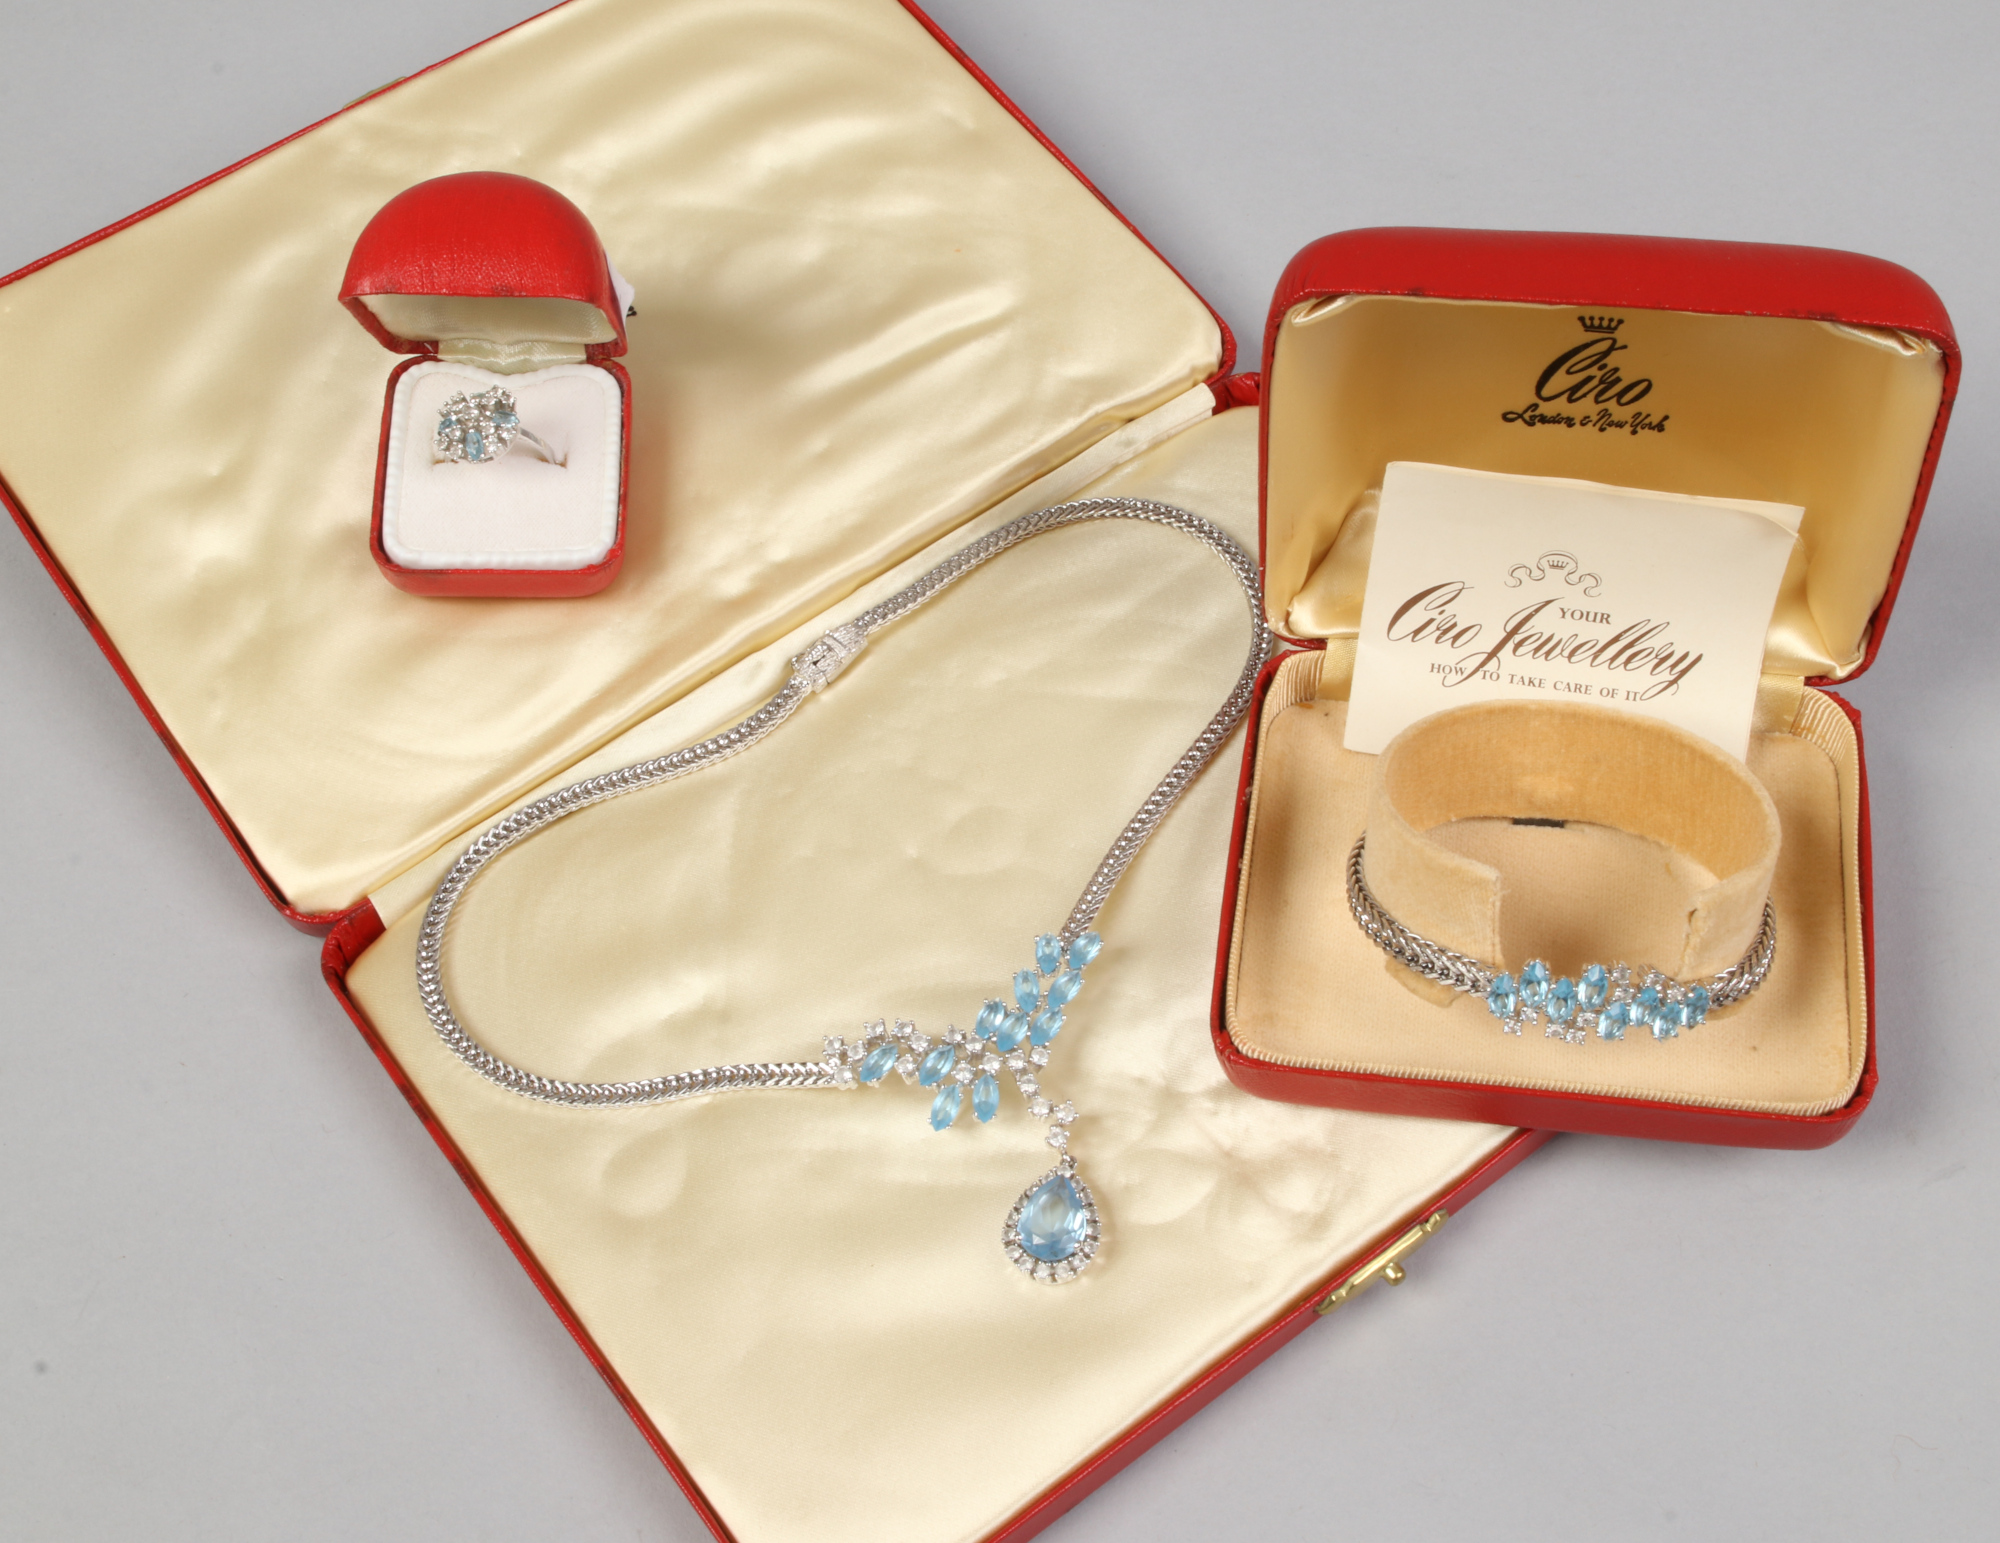 A cased suite of silver dress jewellery, set with white and pale blue paste stones by Ciro including